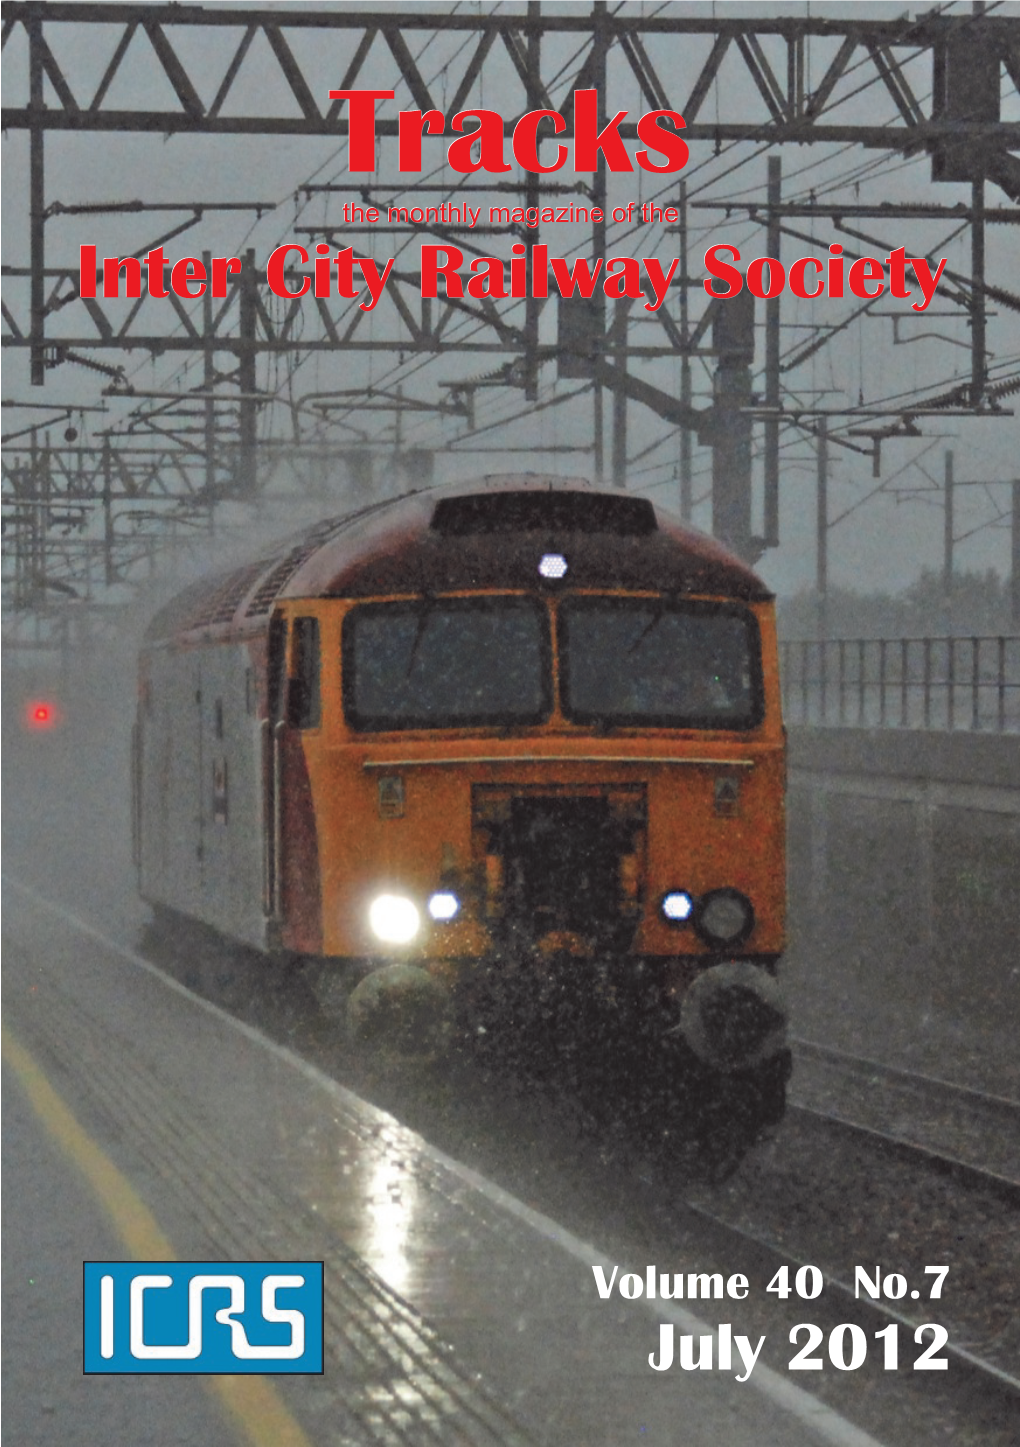 Tracks the Monthly Magazine of the Inter City Railway Society